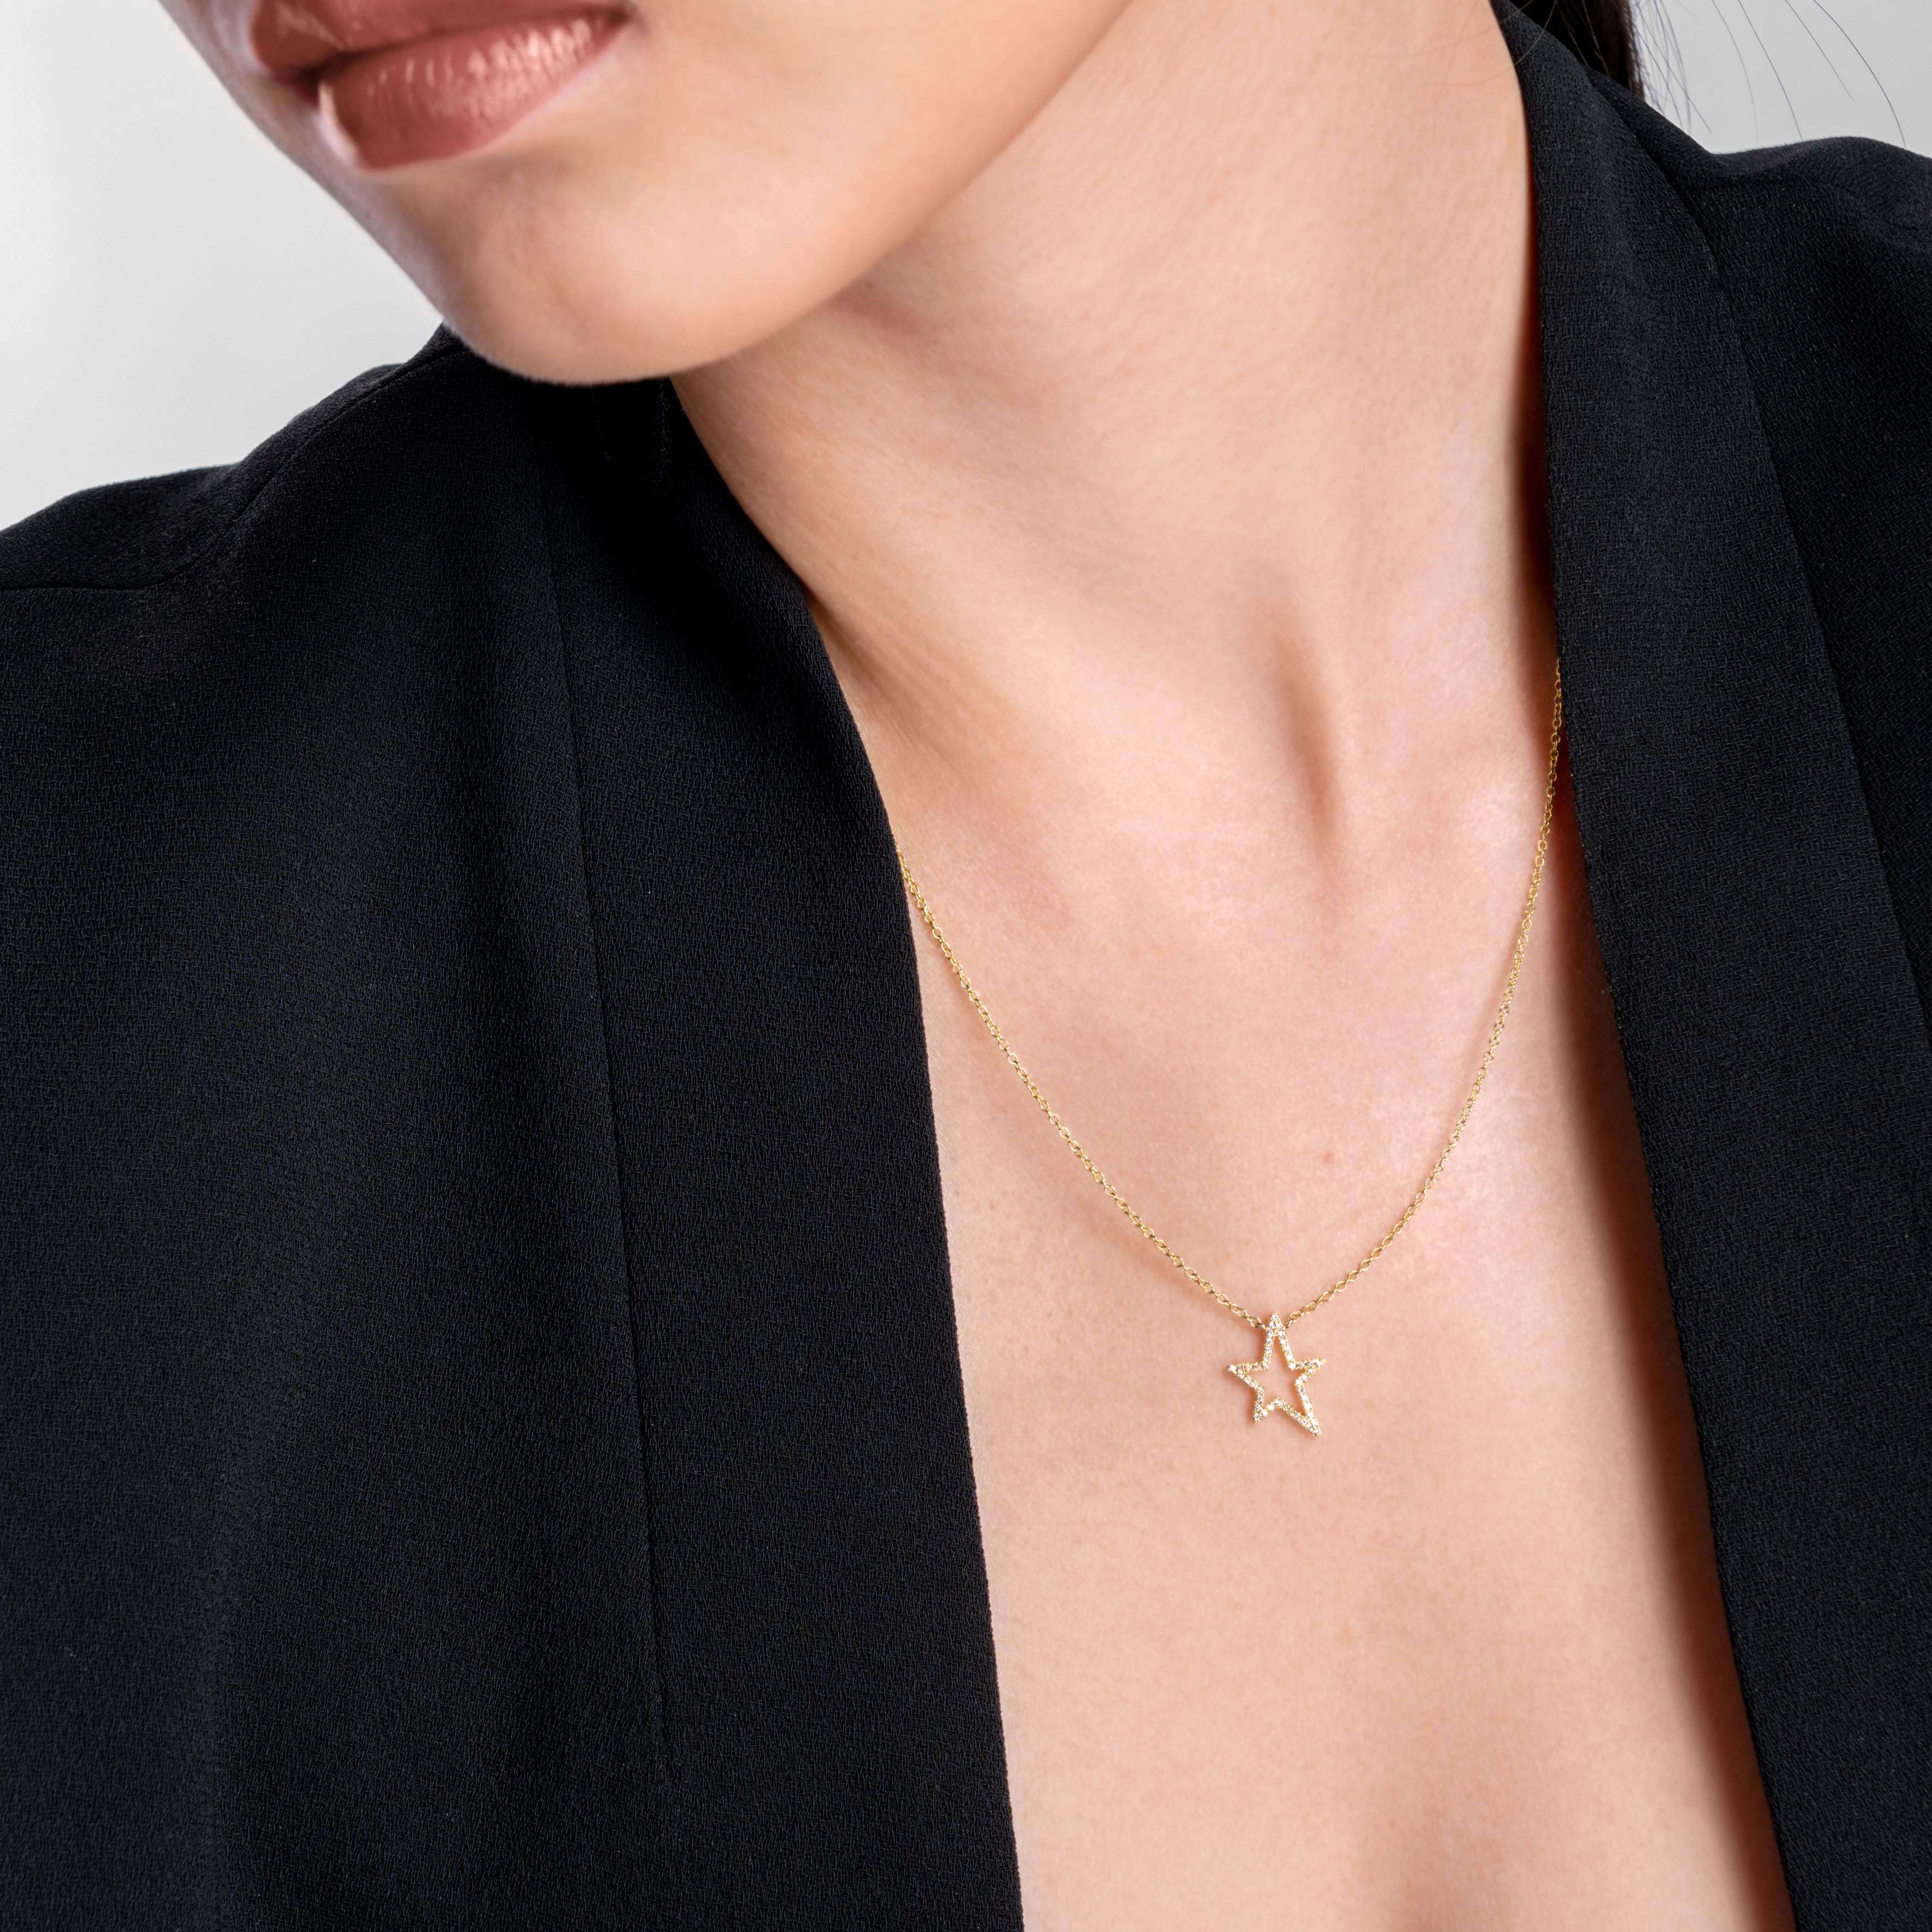 Lady wearing a Adamar Jewels LUZ Mito Necklace in 18K yellow gold set with diamonds